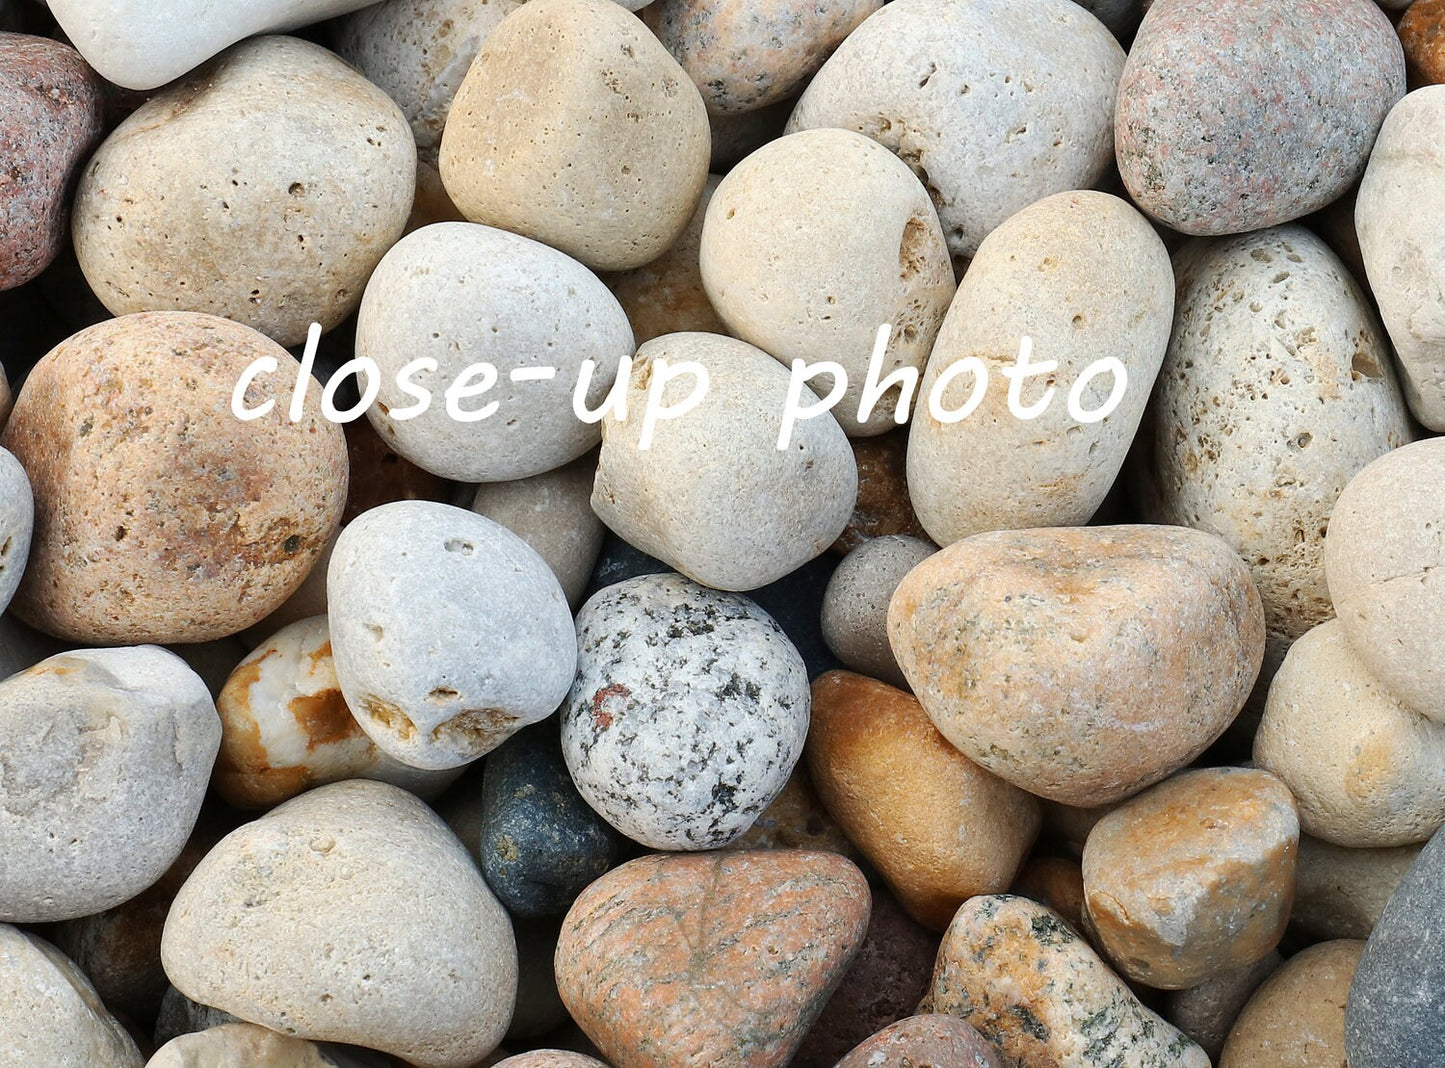 Pebbles art print, pebble beach photography, paper or canvas picture, Lake Michigan, stones photo, rocks wall decor, sizes 5x7 to 30x45"